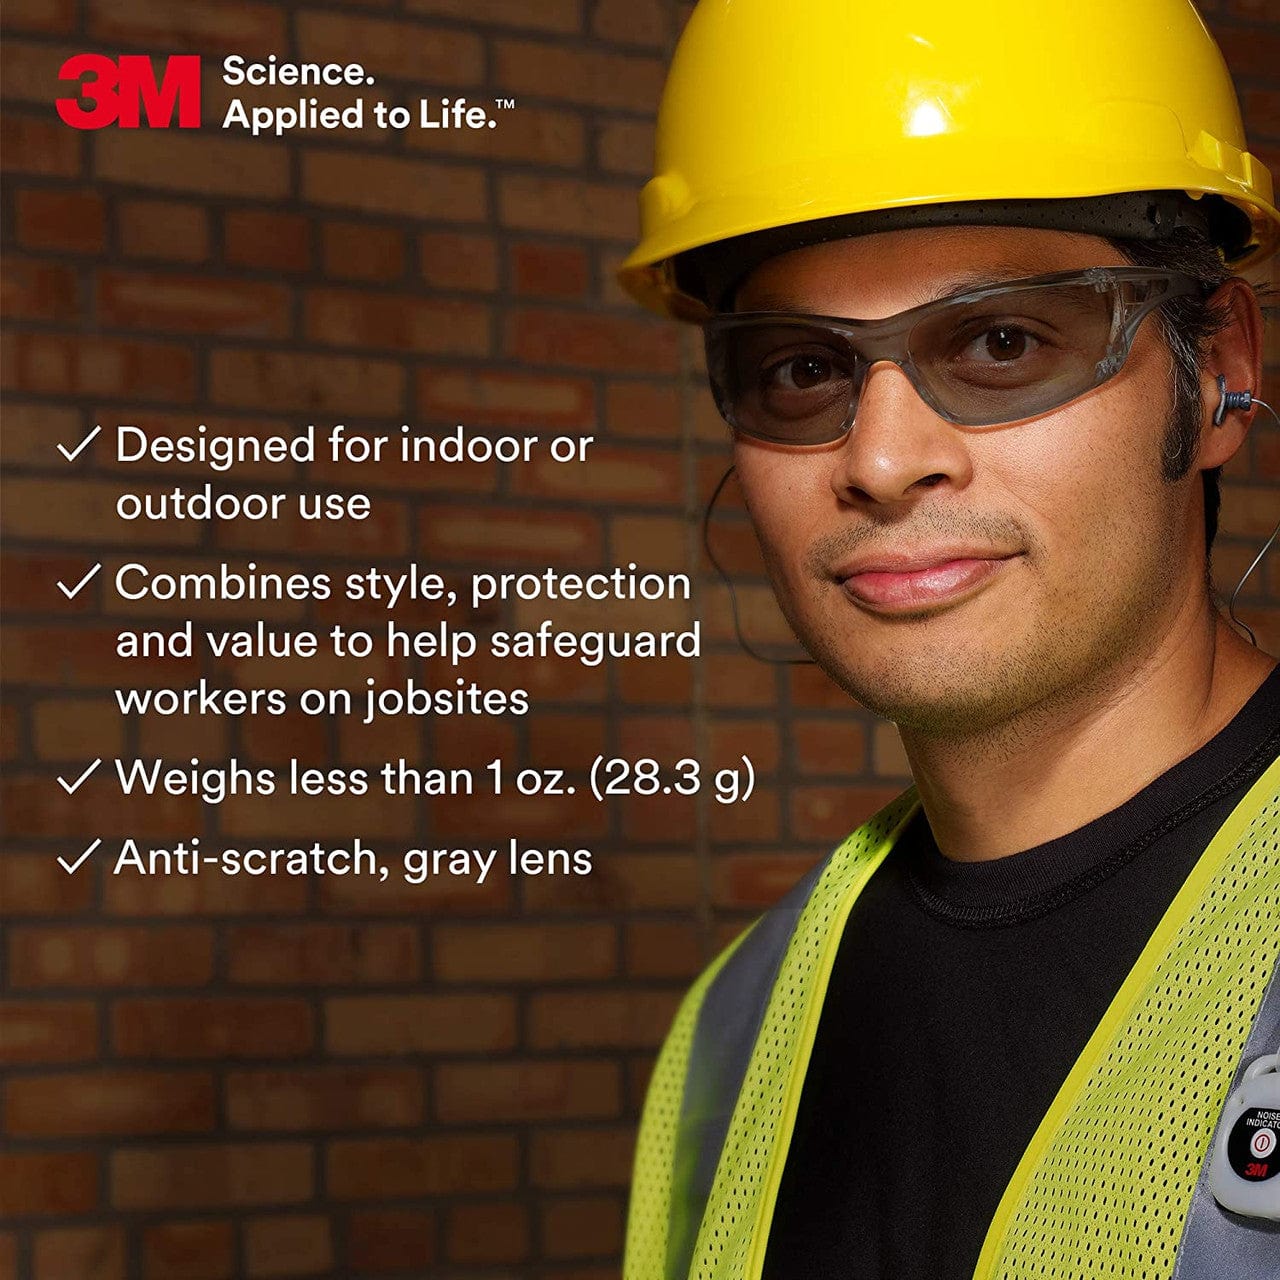 3M Virtua AP Safety Glasses with Gray Lens 11815 Specs